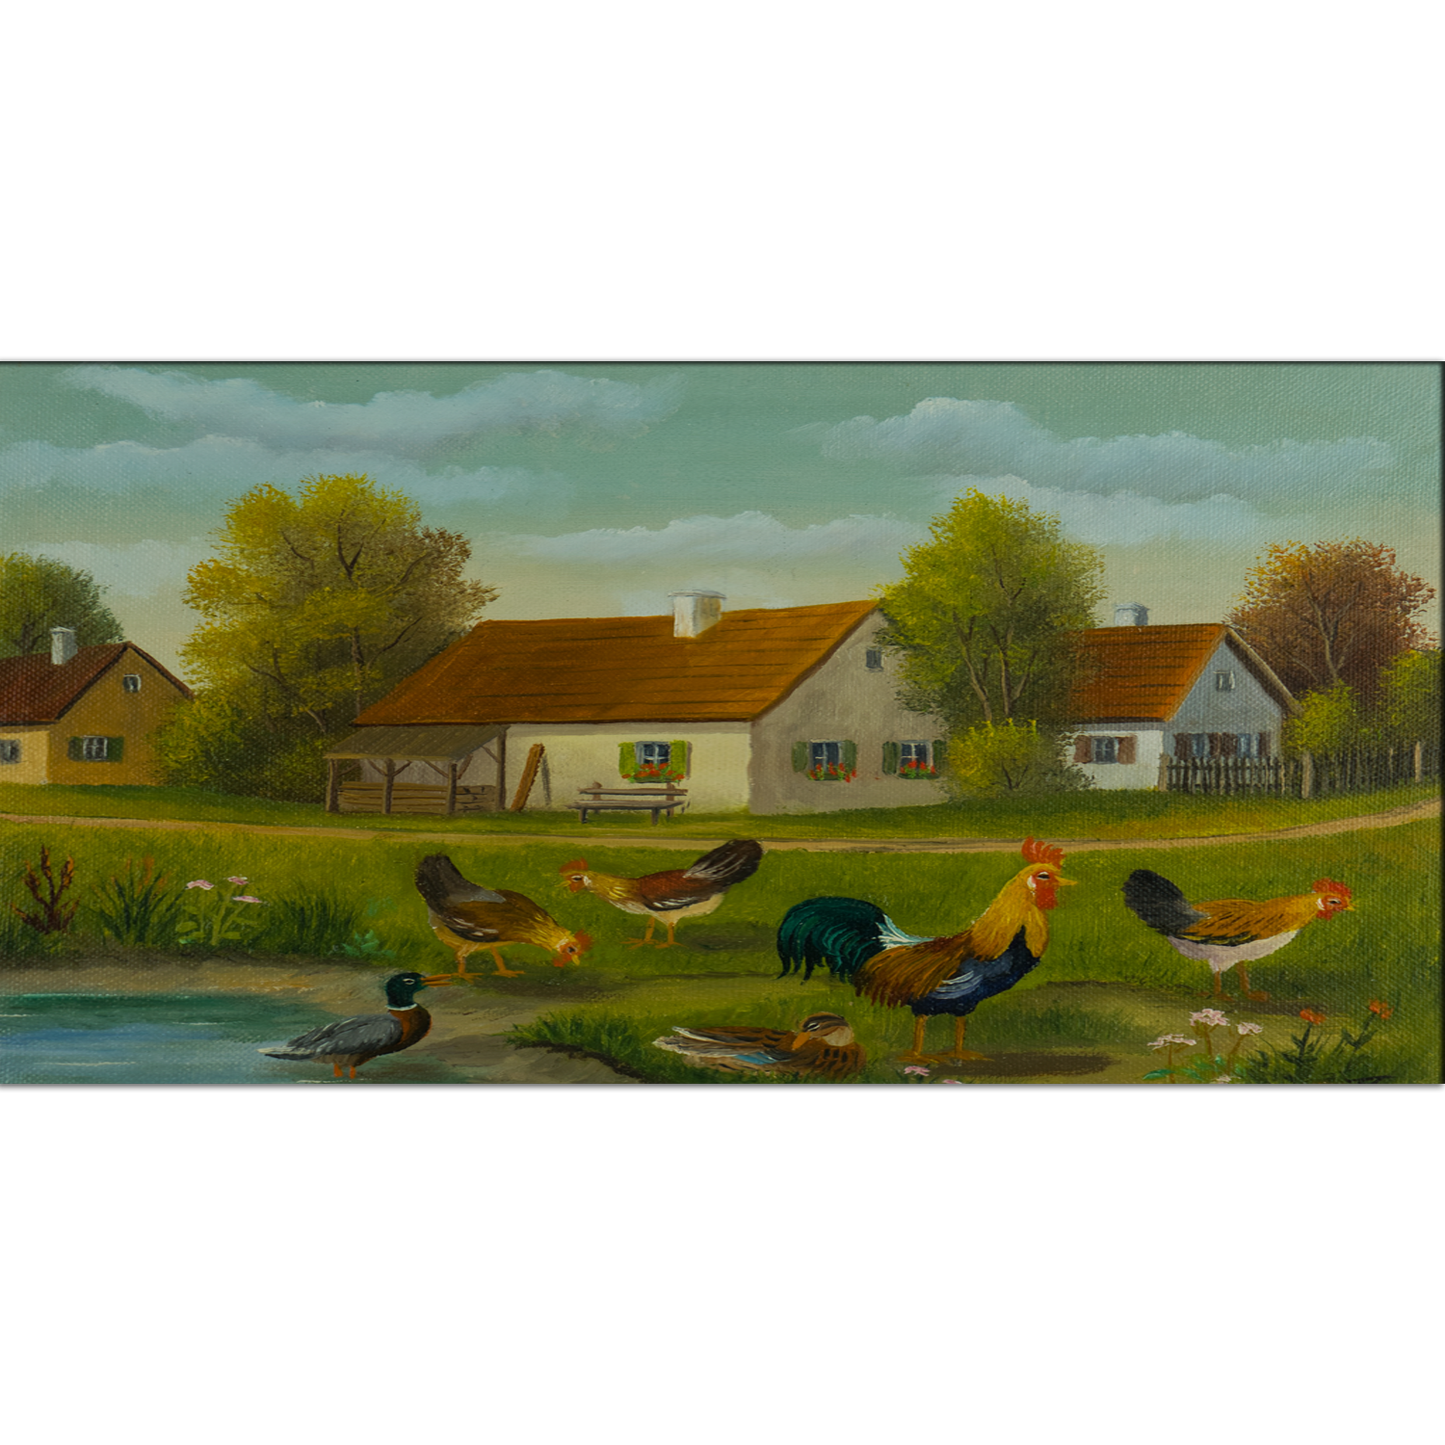 Chickens & Ducks at a Pond Abstract Canvas Print Wall Painting